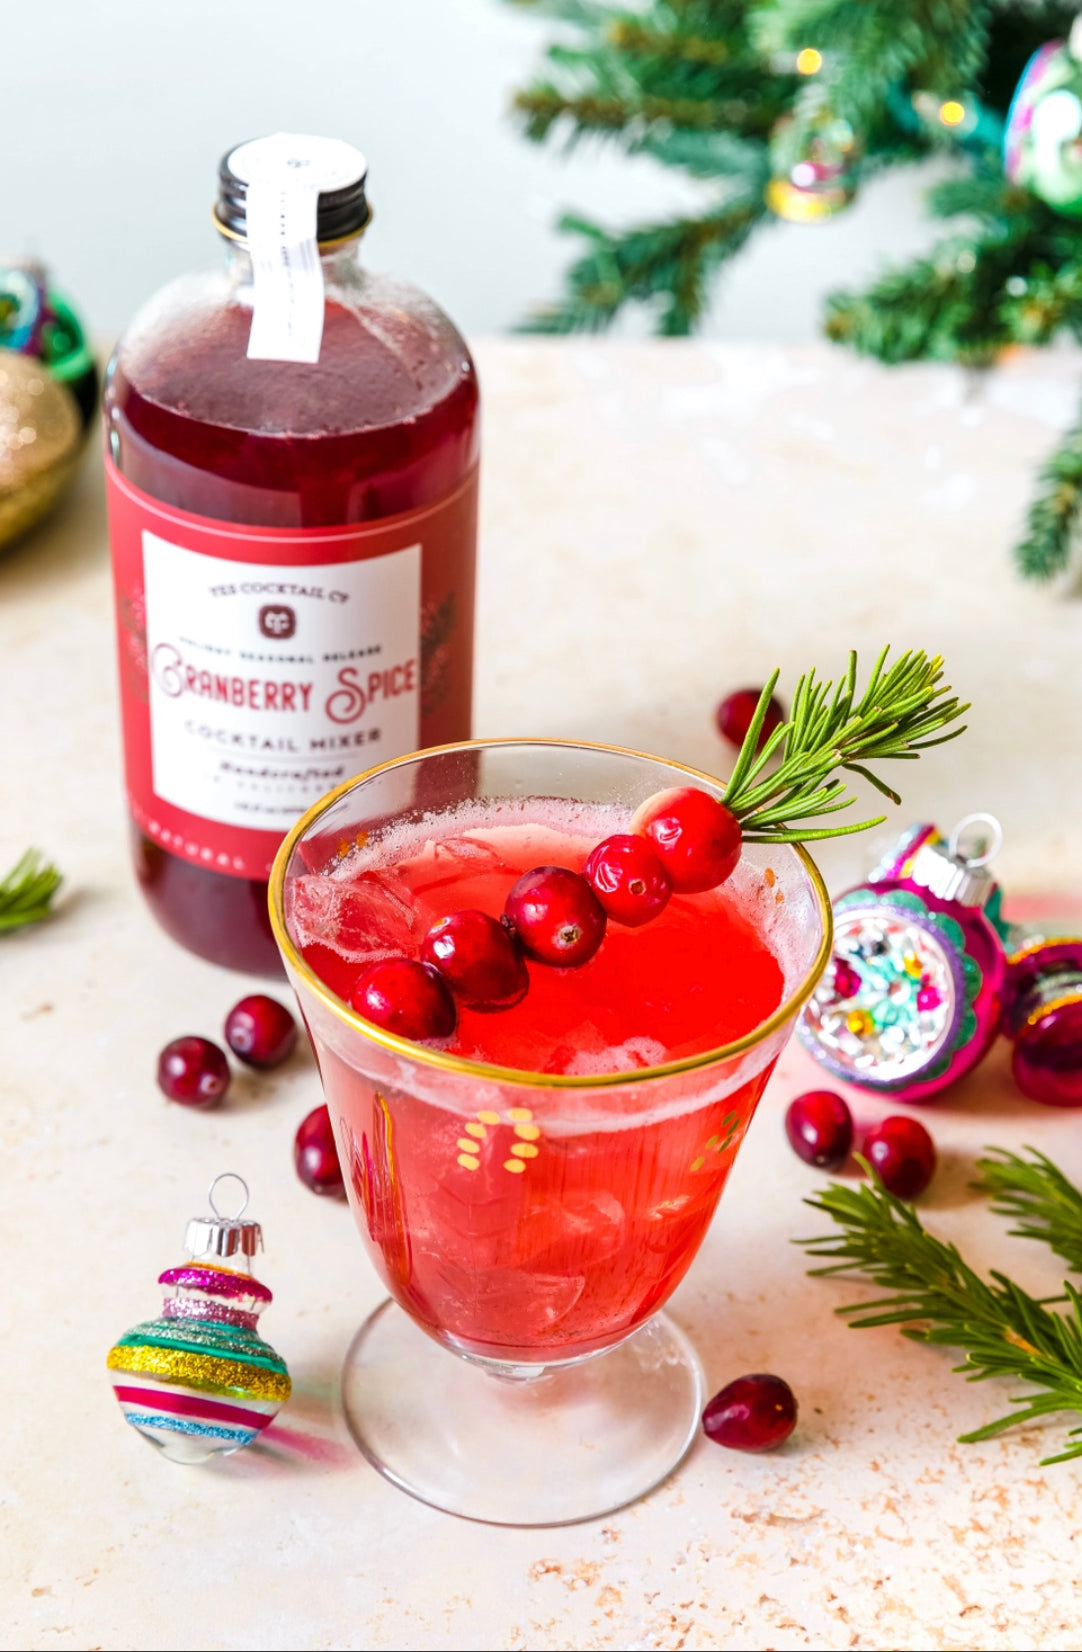 16 oz bottle of handcrafted Cranberry Spice Cocktail Mixer made by Yes Cocktail Co displyed with a finished cocktail in a clear glass garnished with fresh cranberries. Christmas decorations surround the bottle and drink with a tree in the background.